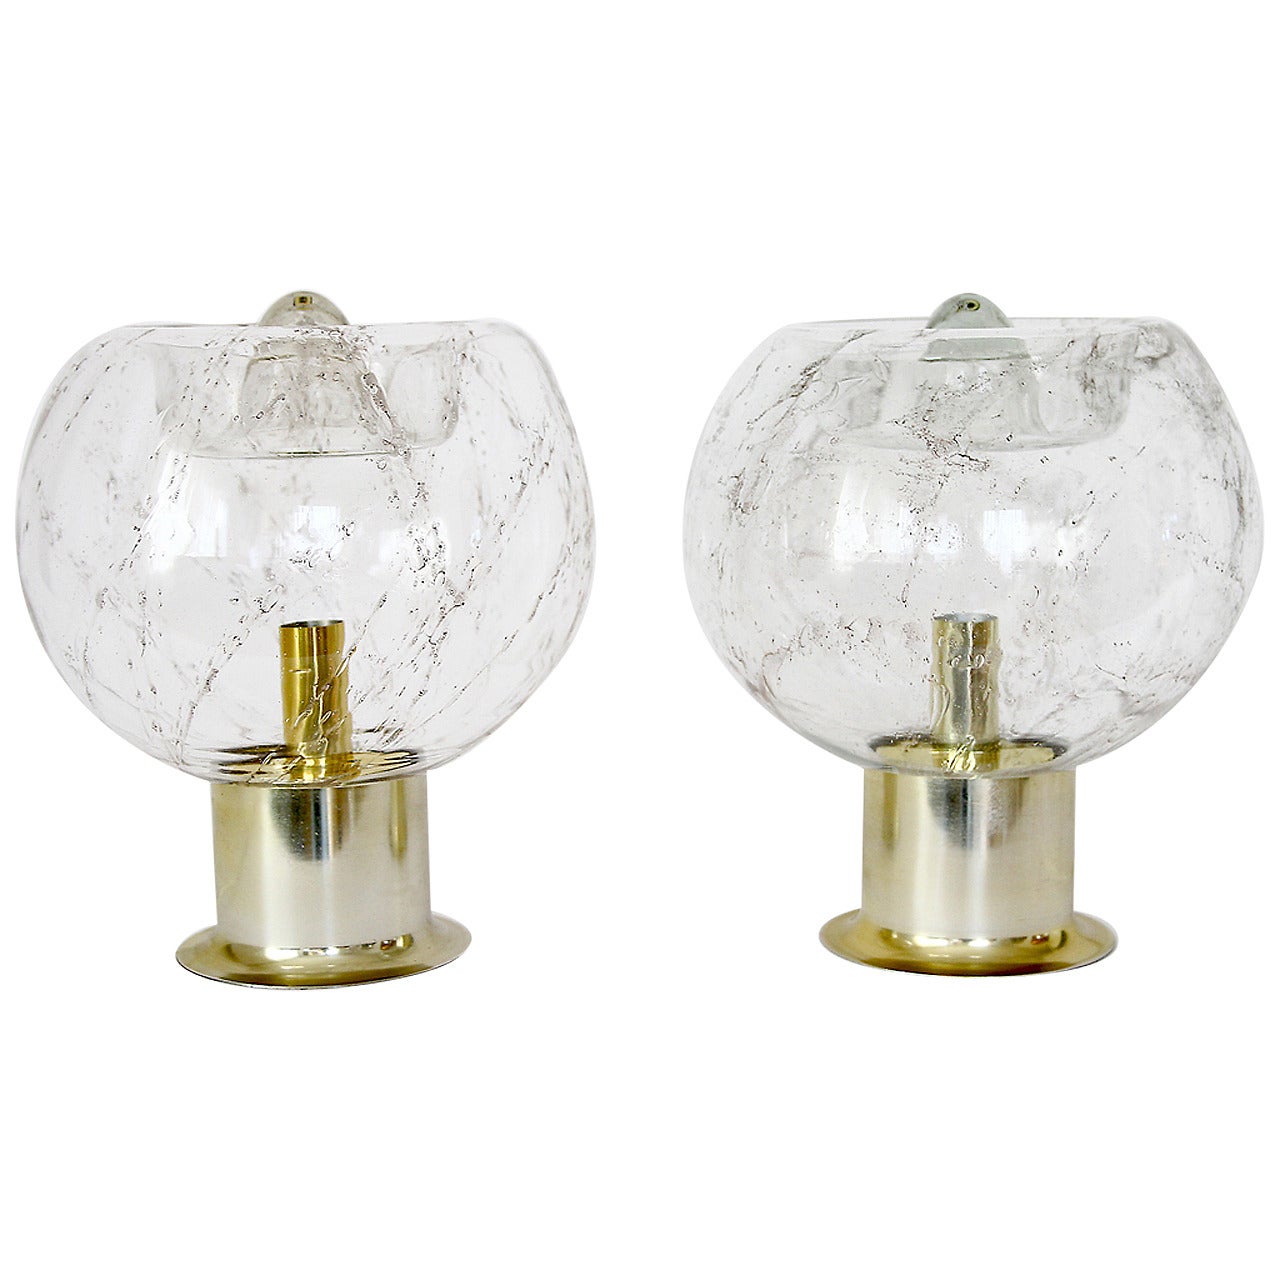 Large Table Lamp by Doria, Smoked Bubble Glass Brass Finish, 1970s